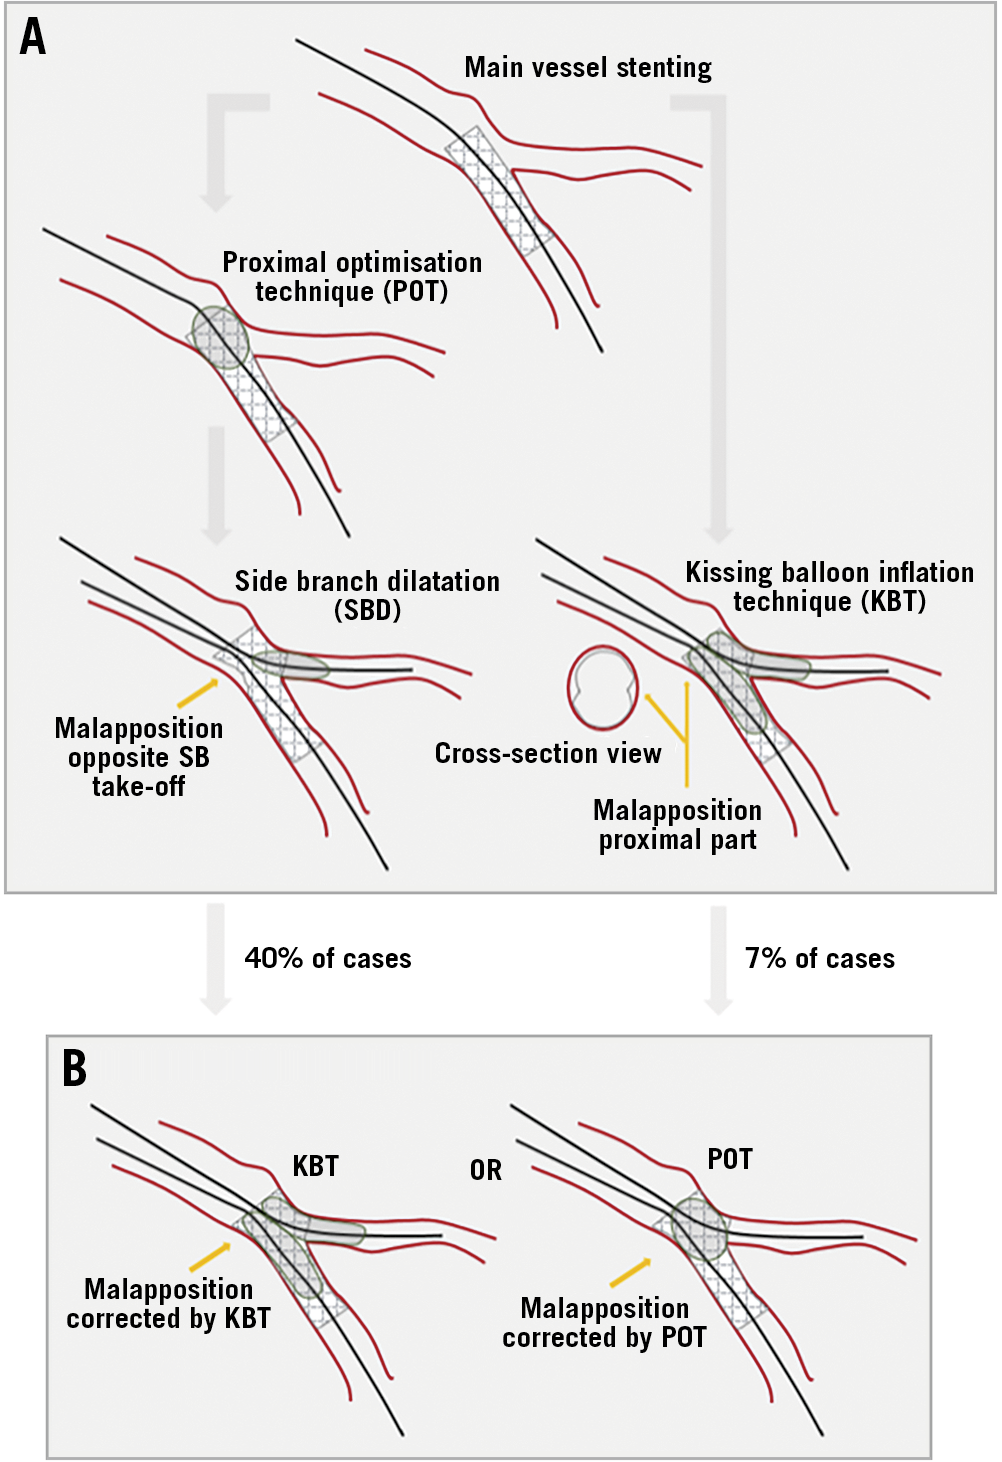 Figure 1. Theoretical procedure versus actual procedure. A) Sketch of the research question. Proximal optimisation technique (POT) followed by side branch dilatation results in malapposition opposite the side branch take-off (left). Kissing balloon inflation technique (KBT) results in malapposition of the proximal part. B) Actual study procedure (right). KBT corrects malapposition opposite the SB. POT corrects malapposition in the proximal part.